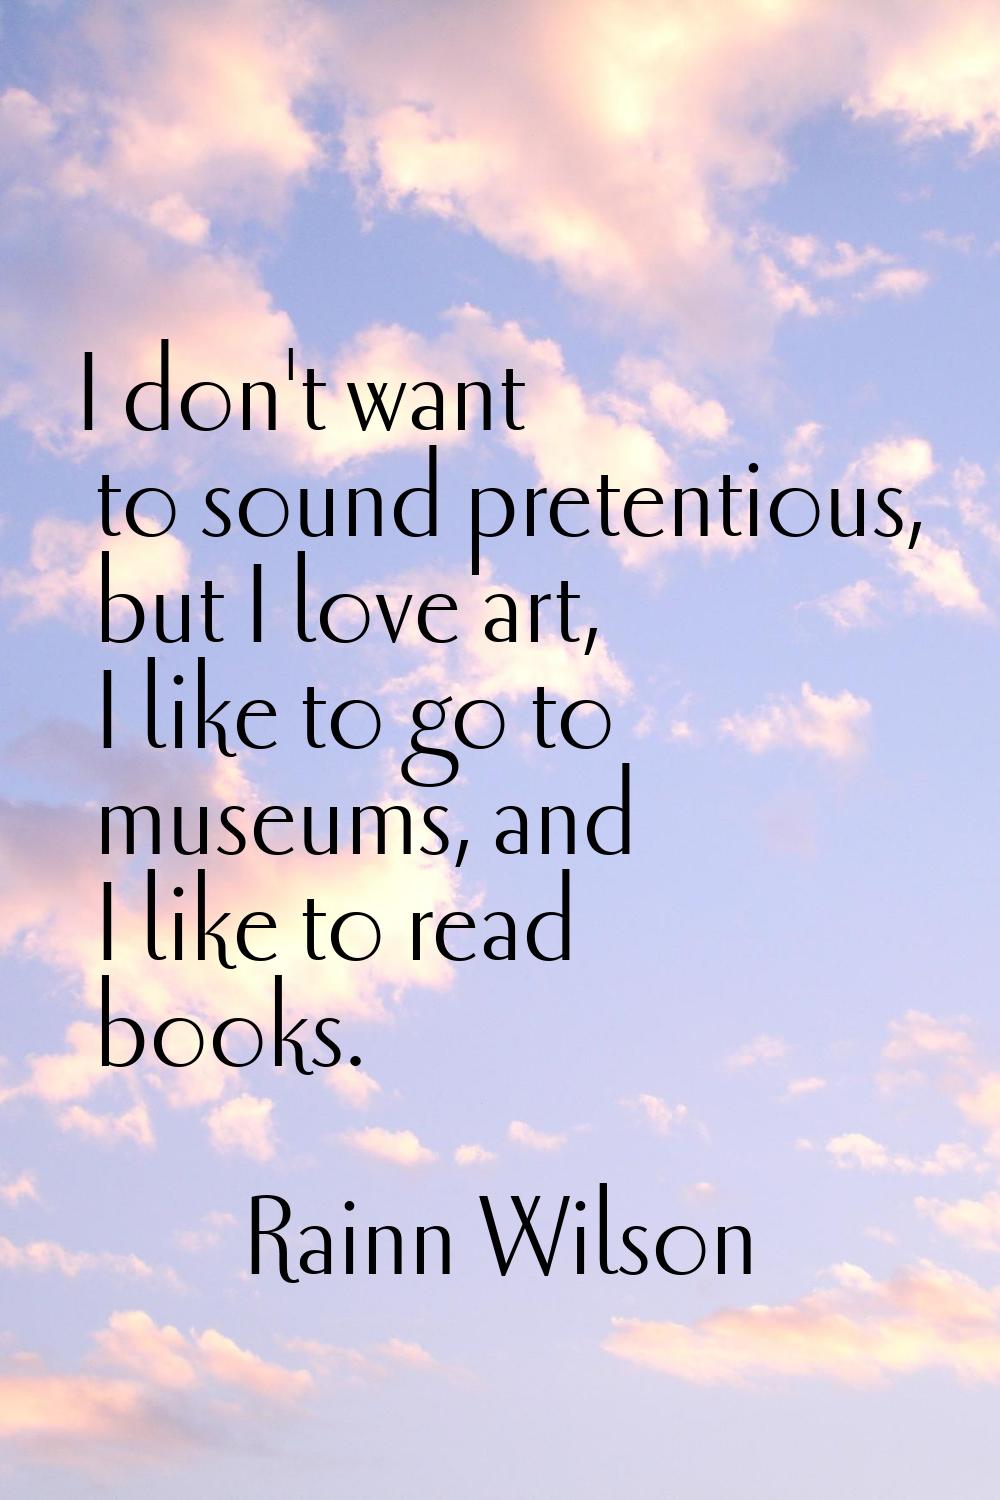 I don't want to sound pretentious, but I love art, I like to go to museums, and I like to read book